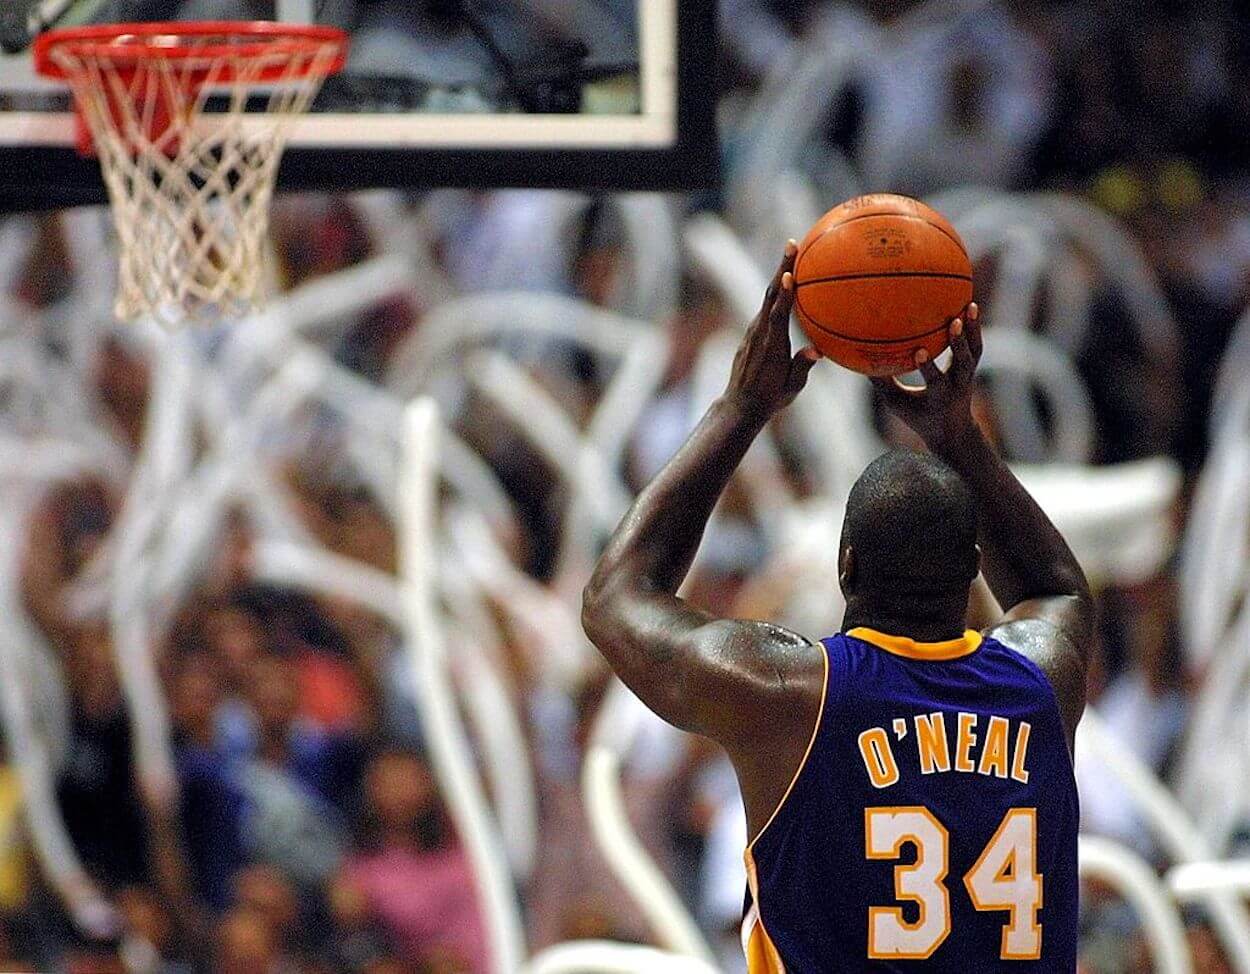 Shaquille O'Neal attempts a free throw during the 2001 NBA postseason.